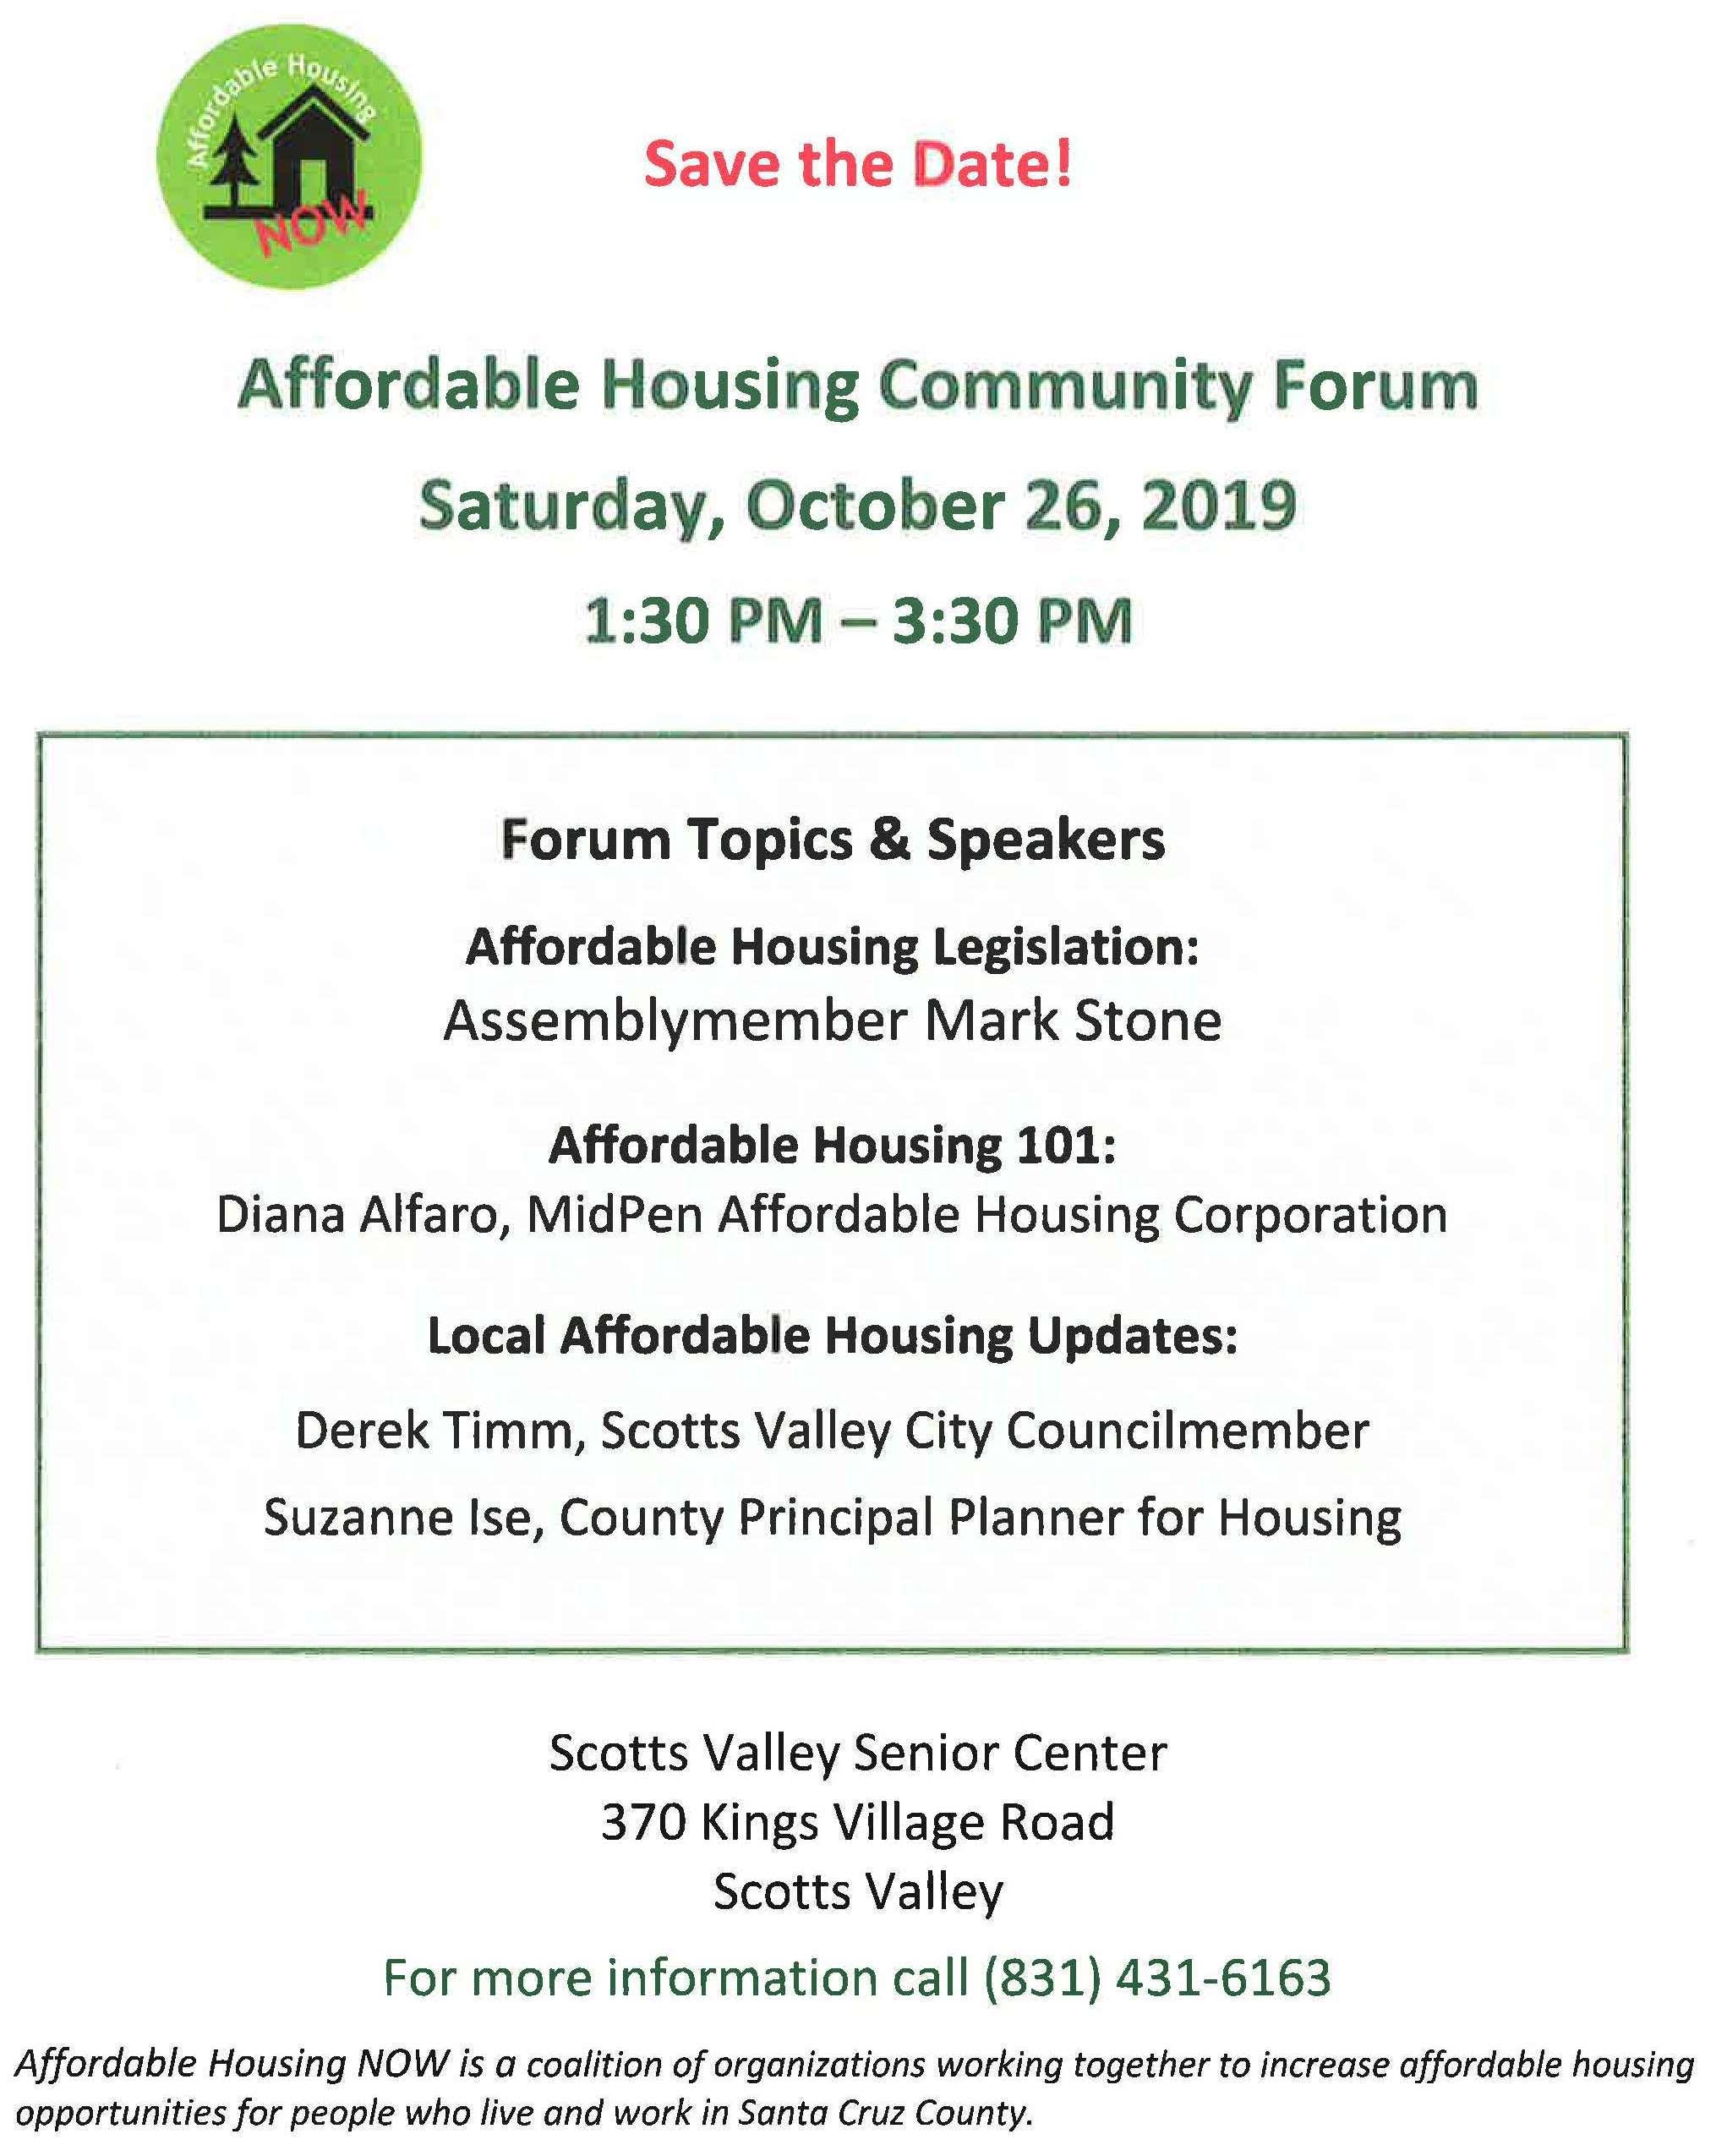 affordable housing community forum; call 431-6163 for information